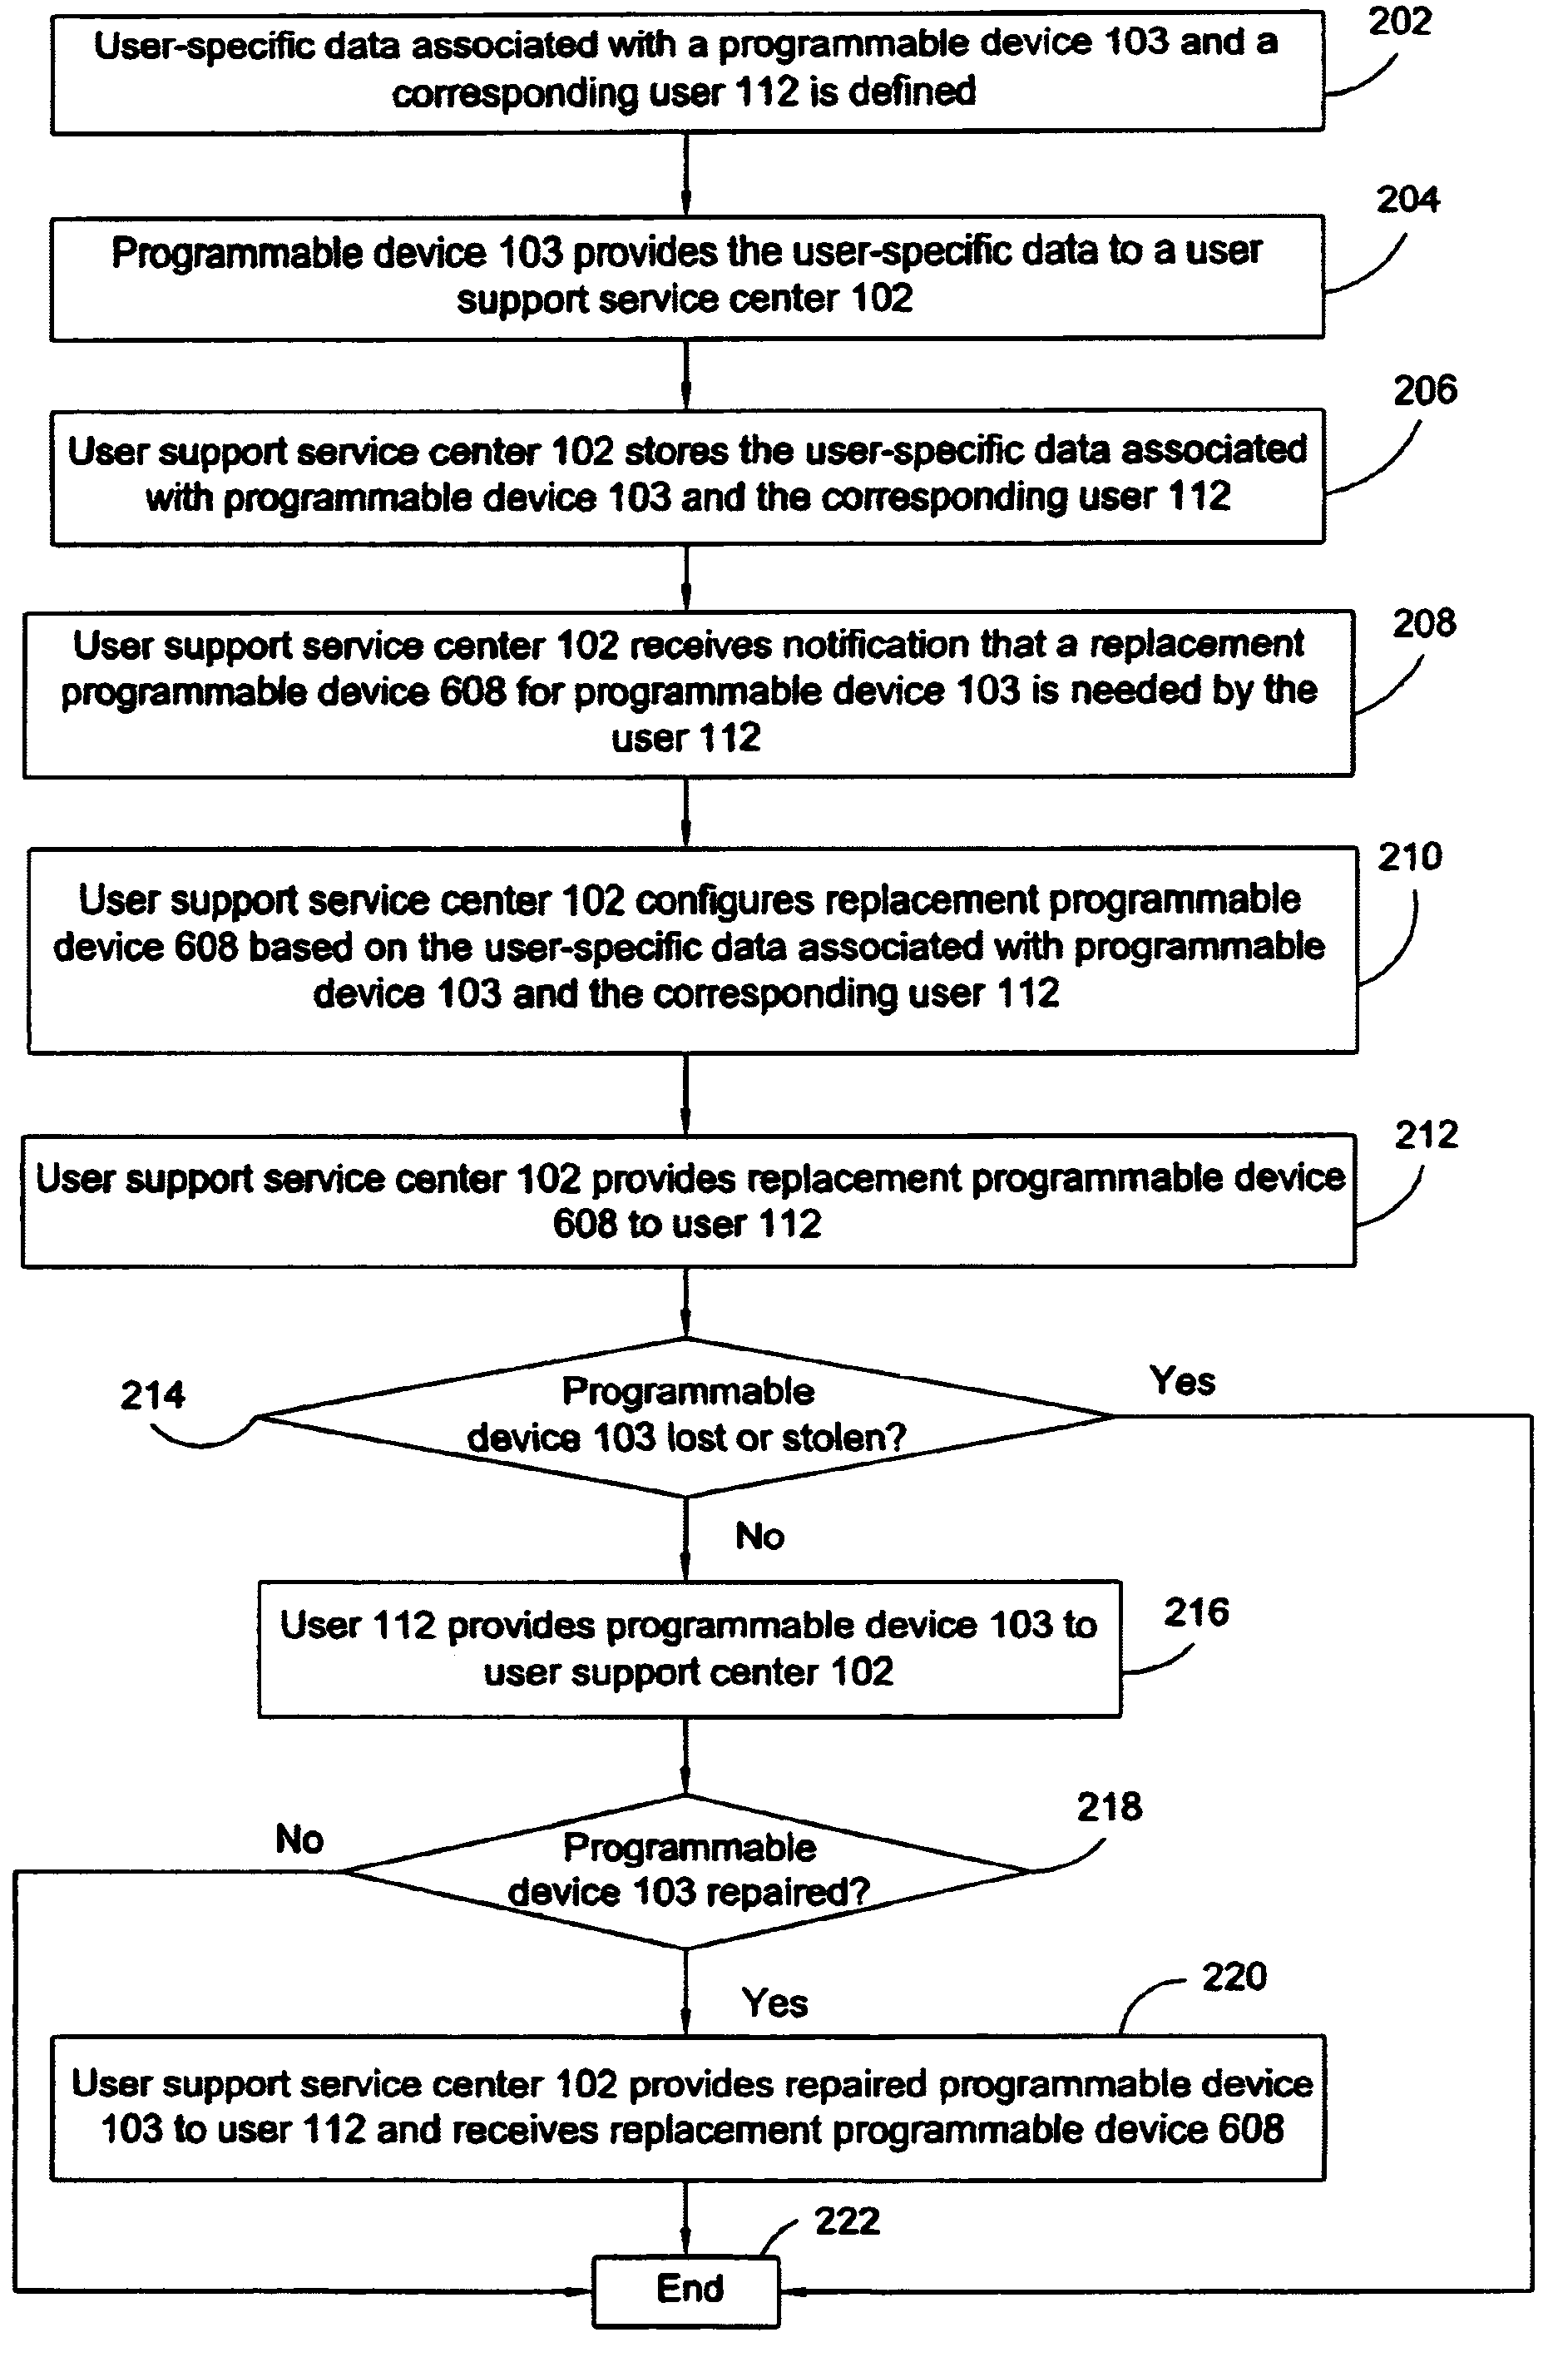 Systems and methods for providing off-line backup of a programmable device's configuration data to users of programmable devices at a service location